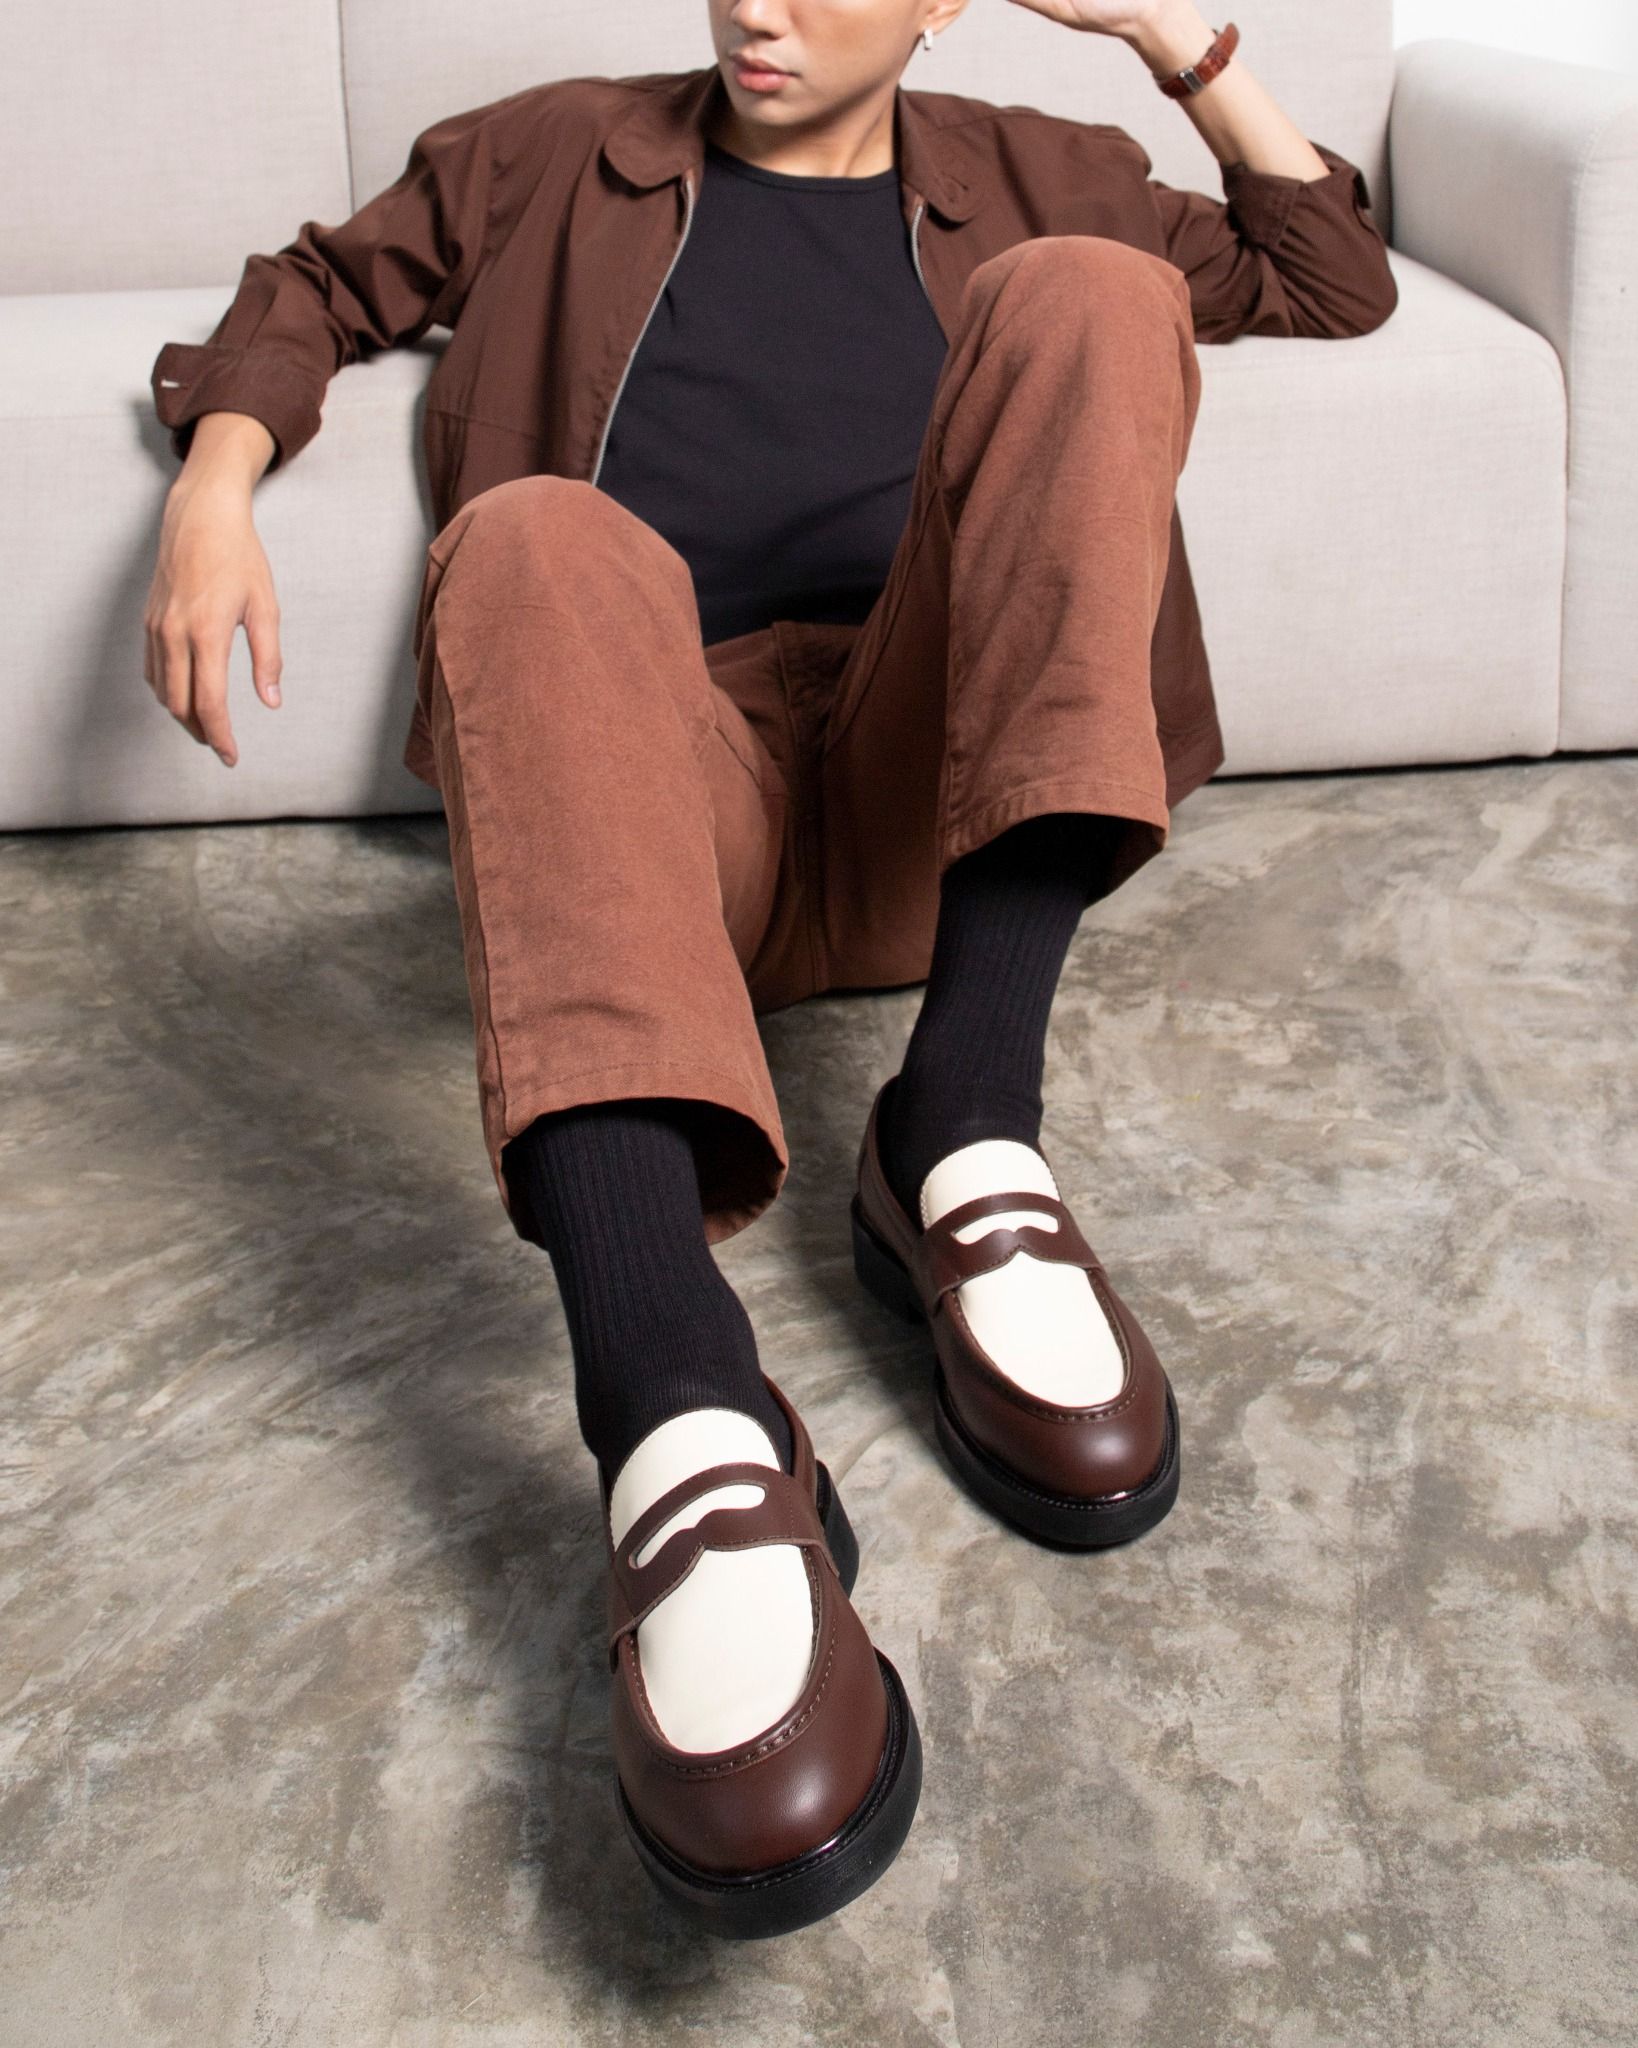  THE SEAN WOLF PENNY LOAFER - BROWN & OFF-WHITE 